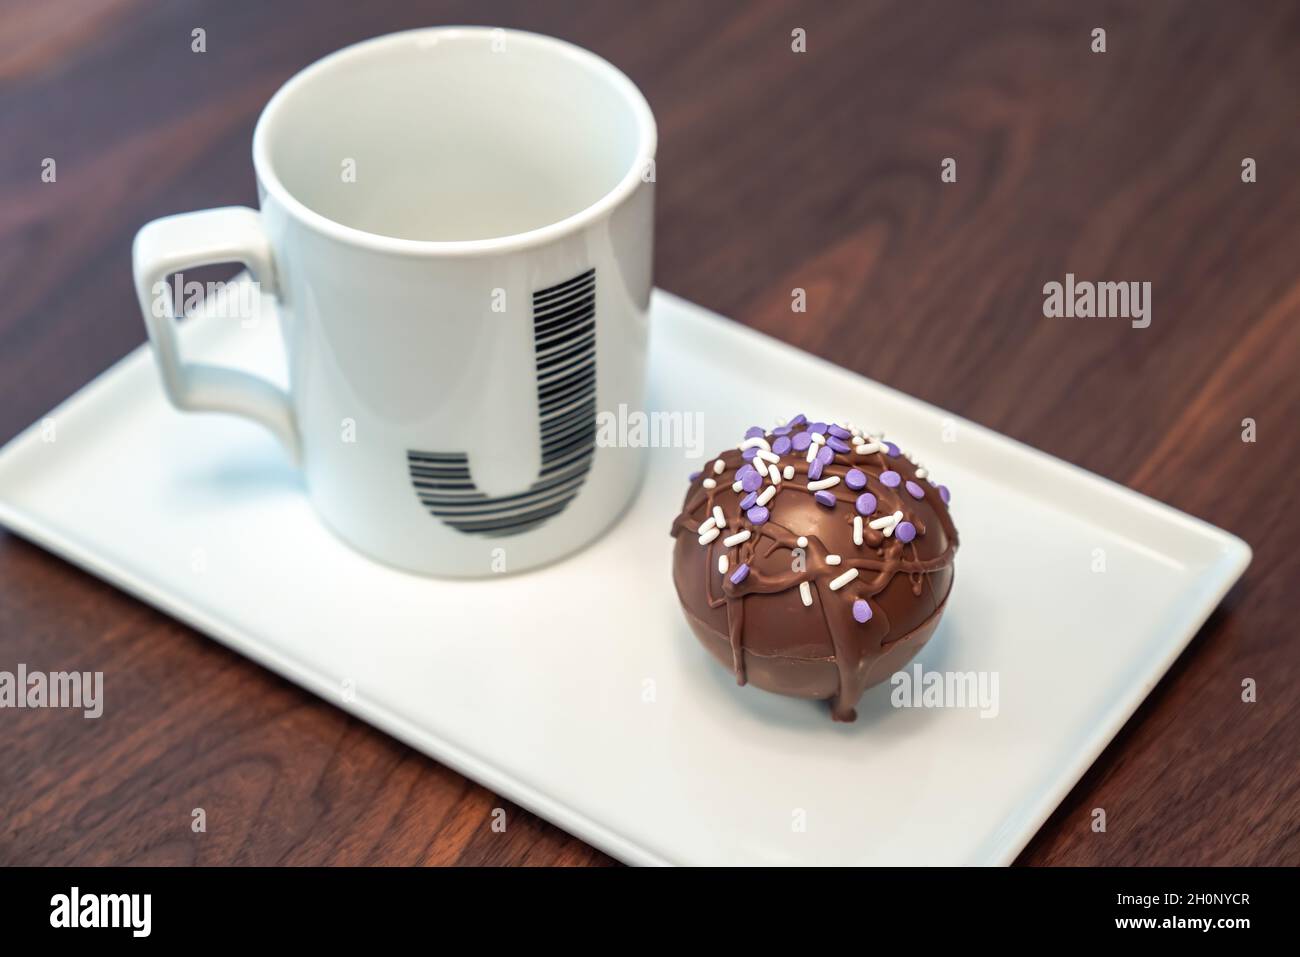 Close up food photograph of a hot cocoa bomb covered in drizzled brown chocolate and purple and white sprinkles set on a white serving plate next to a Stock Photo